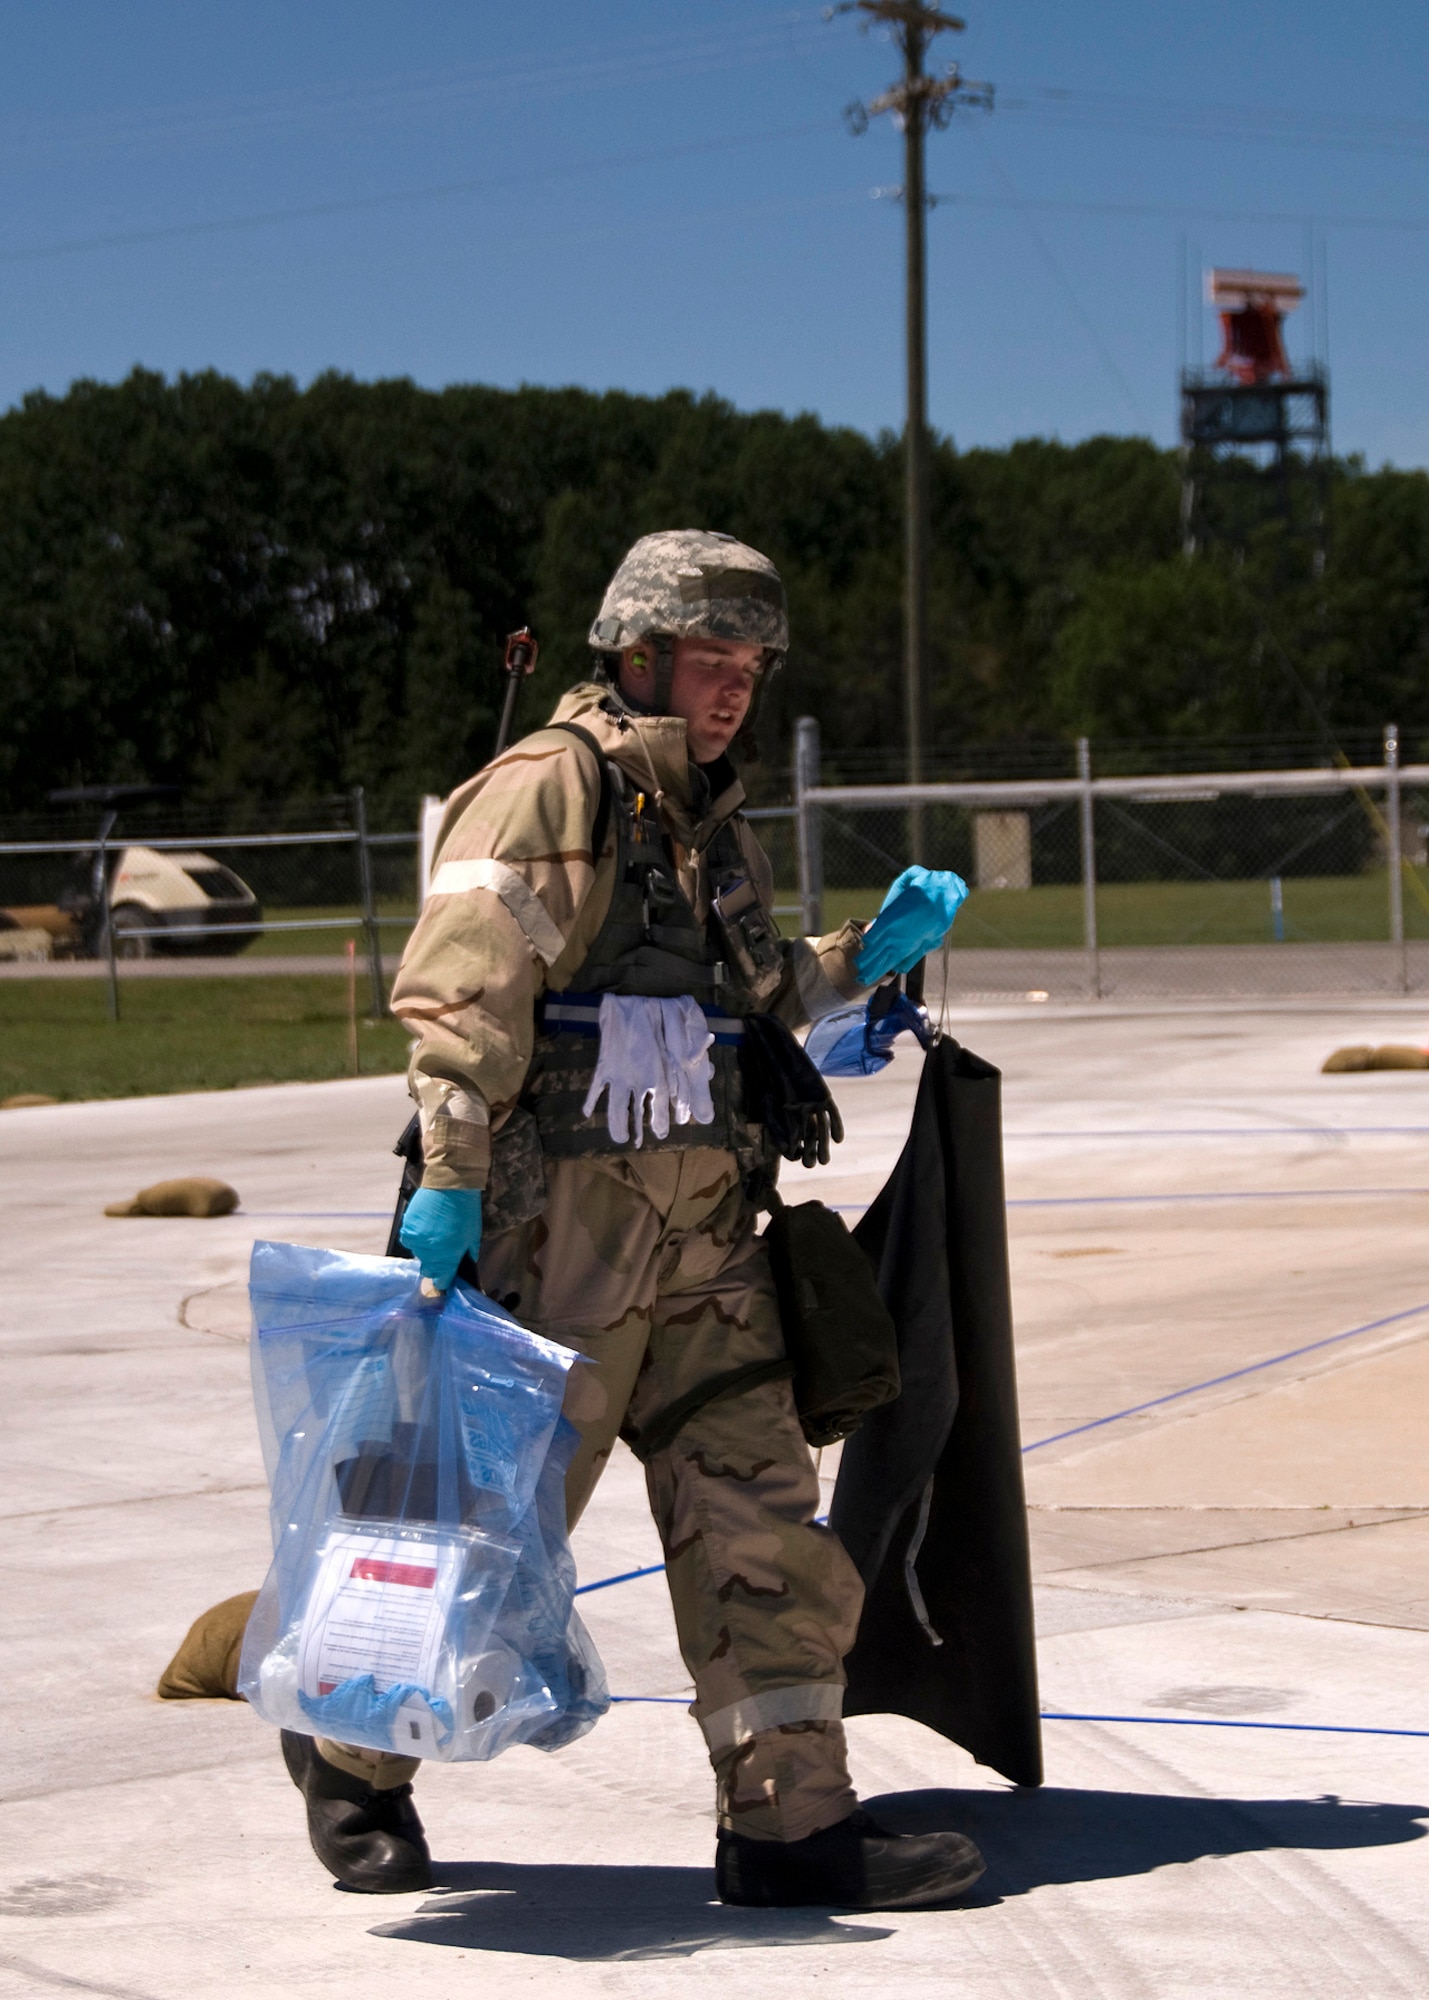 Senior Airman Samuel Wirstrom, 137th Air Refueling Wing Petroleum, Oil and Lubricant flight collects samples to test in the laboratory while deployed to Alpena, Mich. June 13, 2012.  The 137th, 459th and 507 Air Refueling Wings united for an Operational Readiness Inspection at the 124th Air Expeditionary Wing.  (USAF Photo by Tech. Sgt. Roberta A. Thompson)